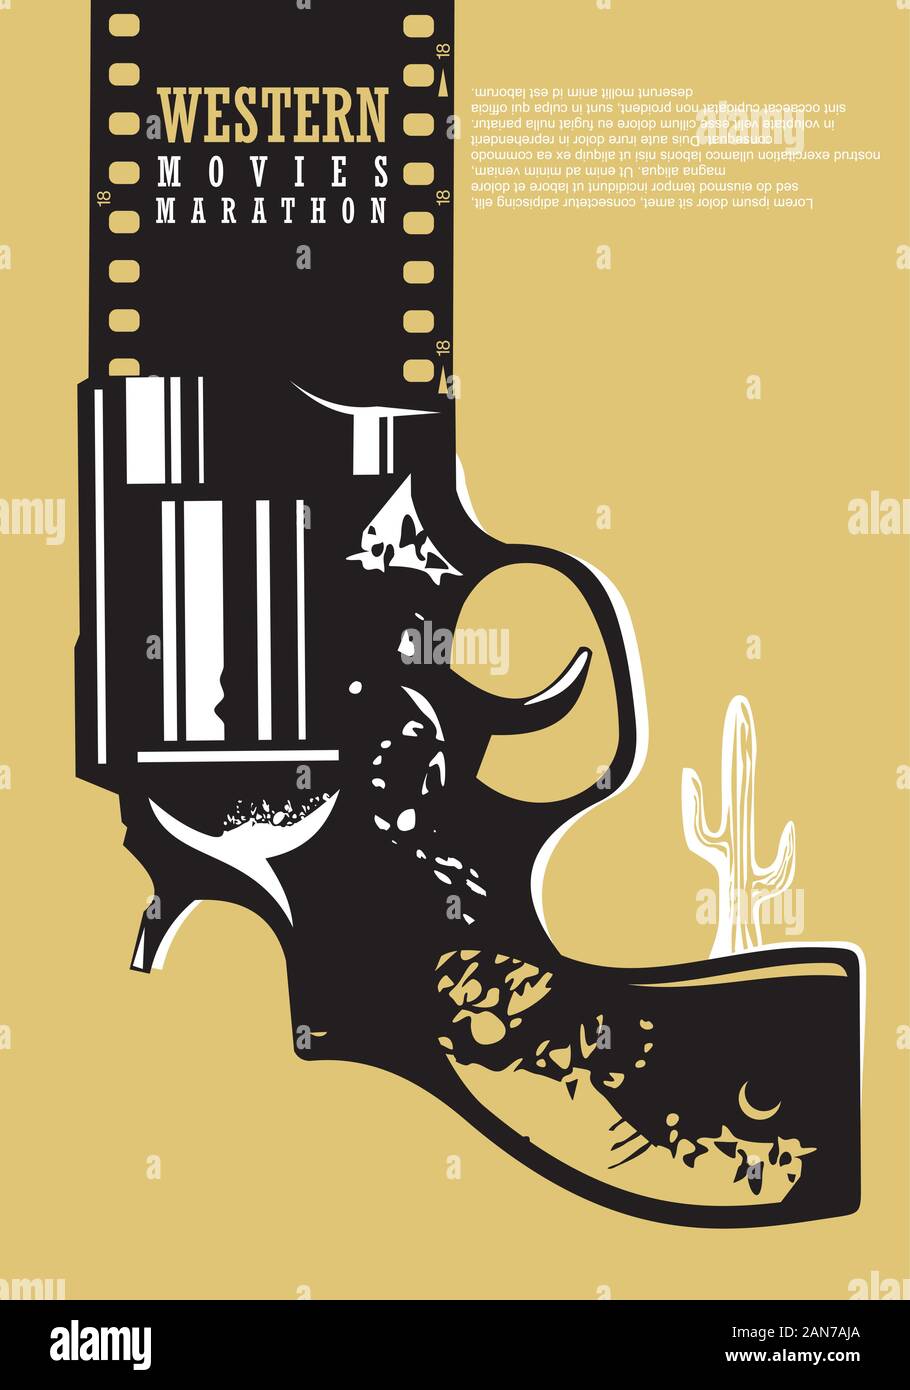 Western movies cinema poster design. Film industry advertise with revolver graphic, desert cactus and film strip. Artistic concept. Stock Vector